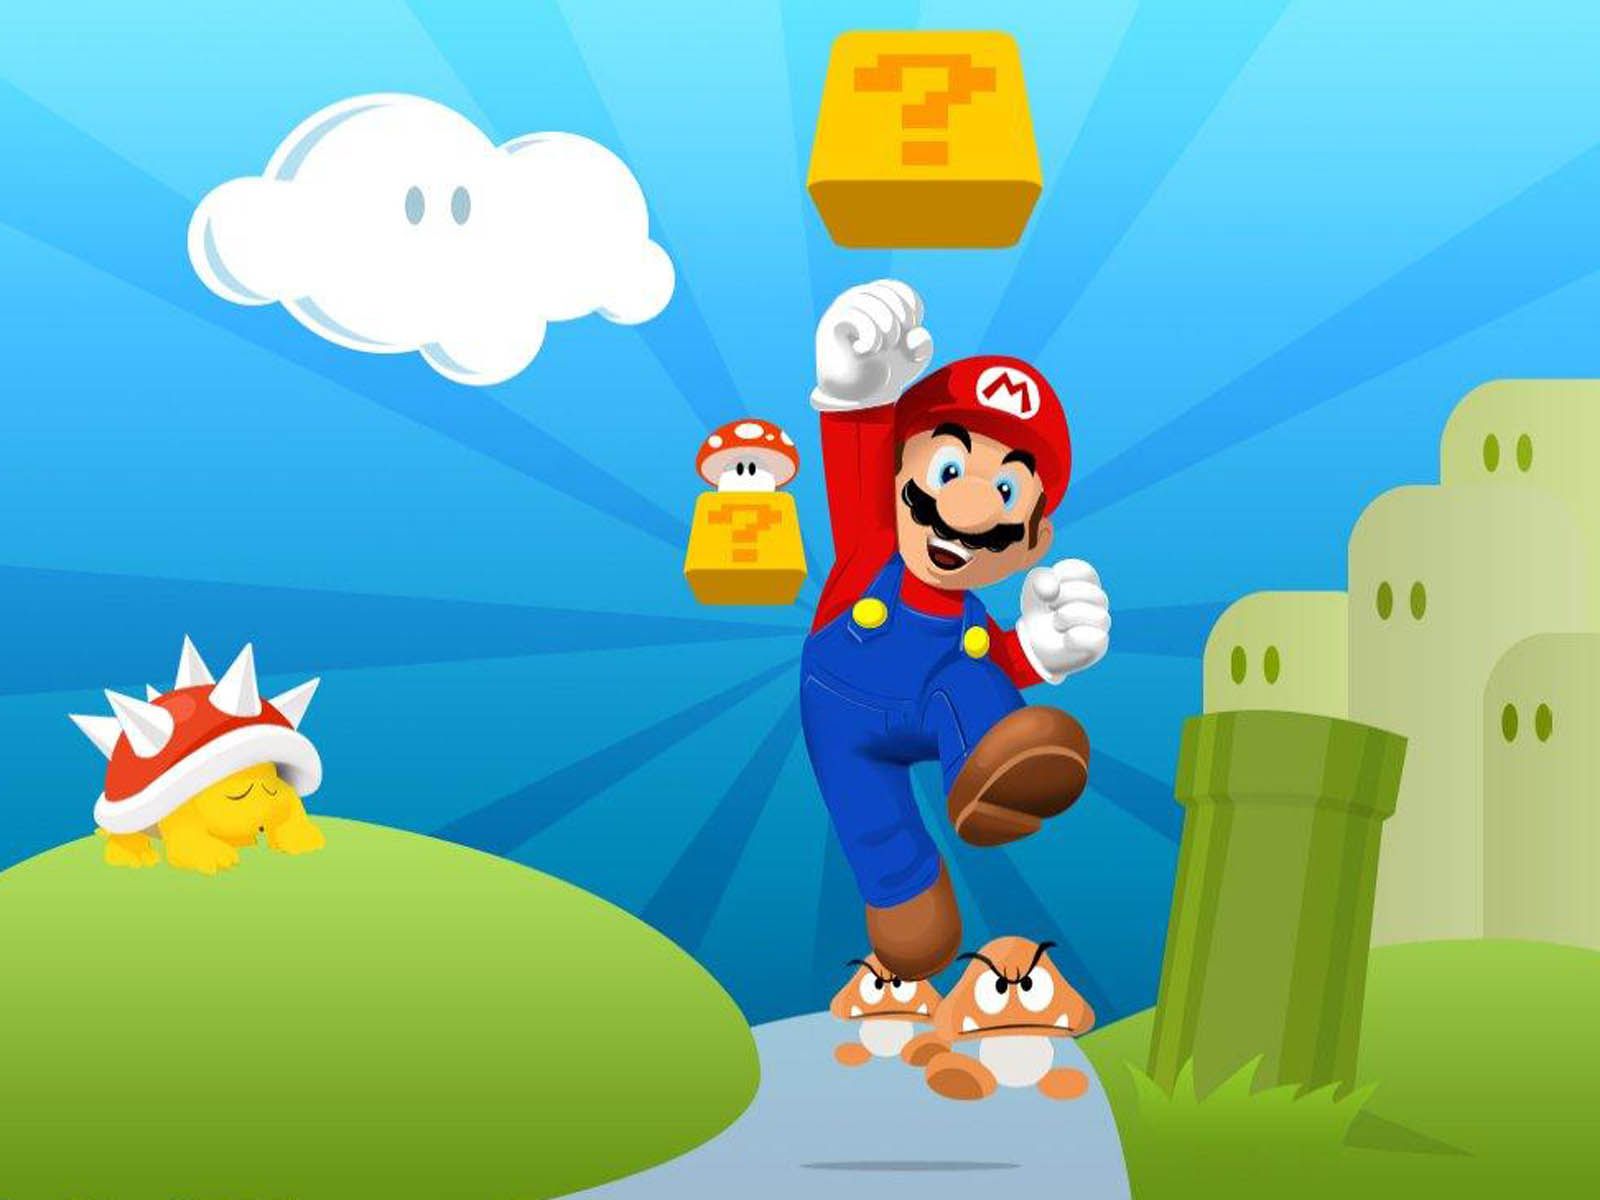 Free download Tag Super Mario Wallpaper Image Photo Picture and Background [1600x1200] for your Desktop, Mobile & Tablet. Explore Super Mario Wallpaper Image. Super HD Wallpaper, Nintendo Wallpaper, Mario Bros Wallpaper